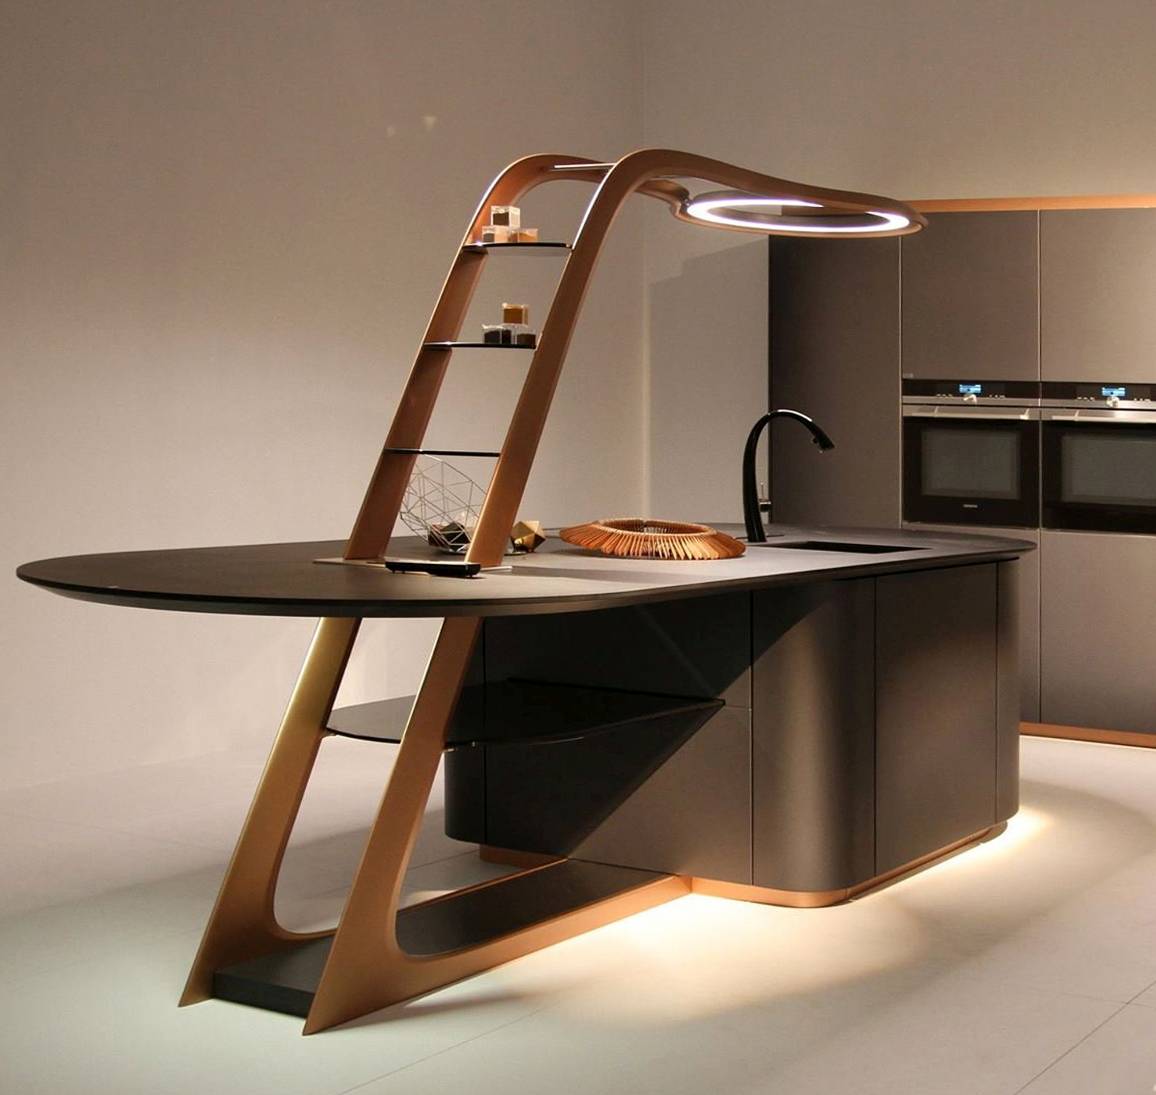 Kitchen cabinetry of carbon fiber and hi tech finishes 